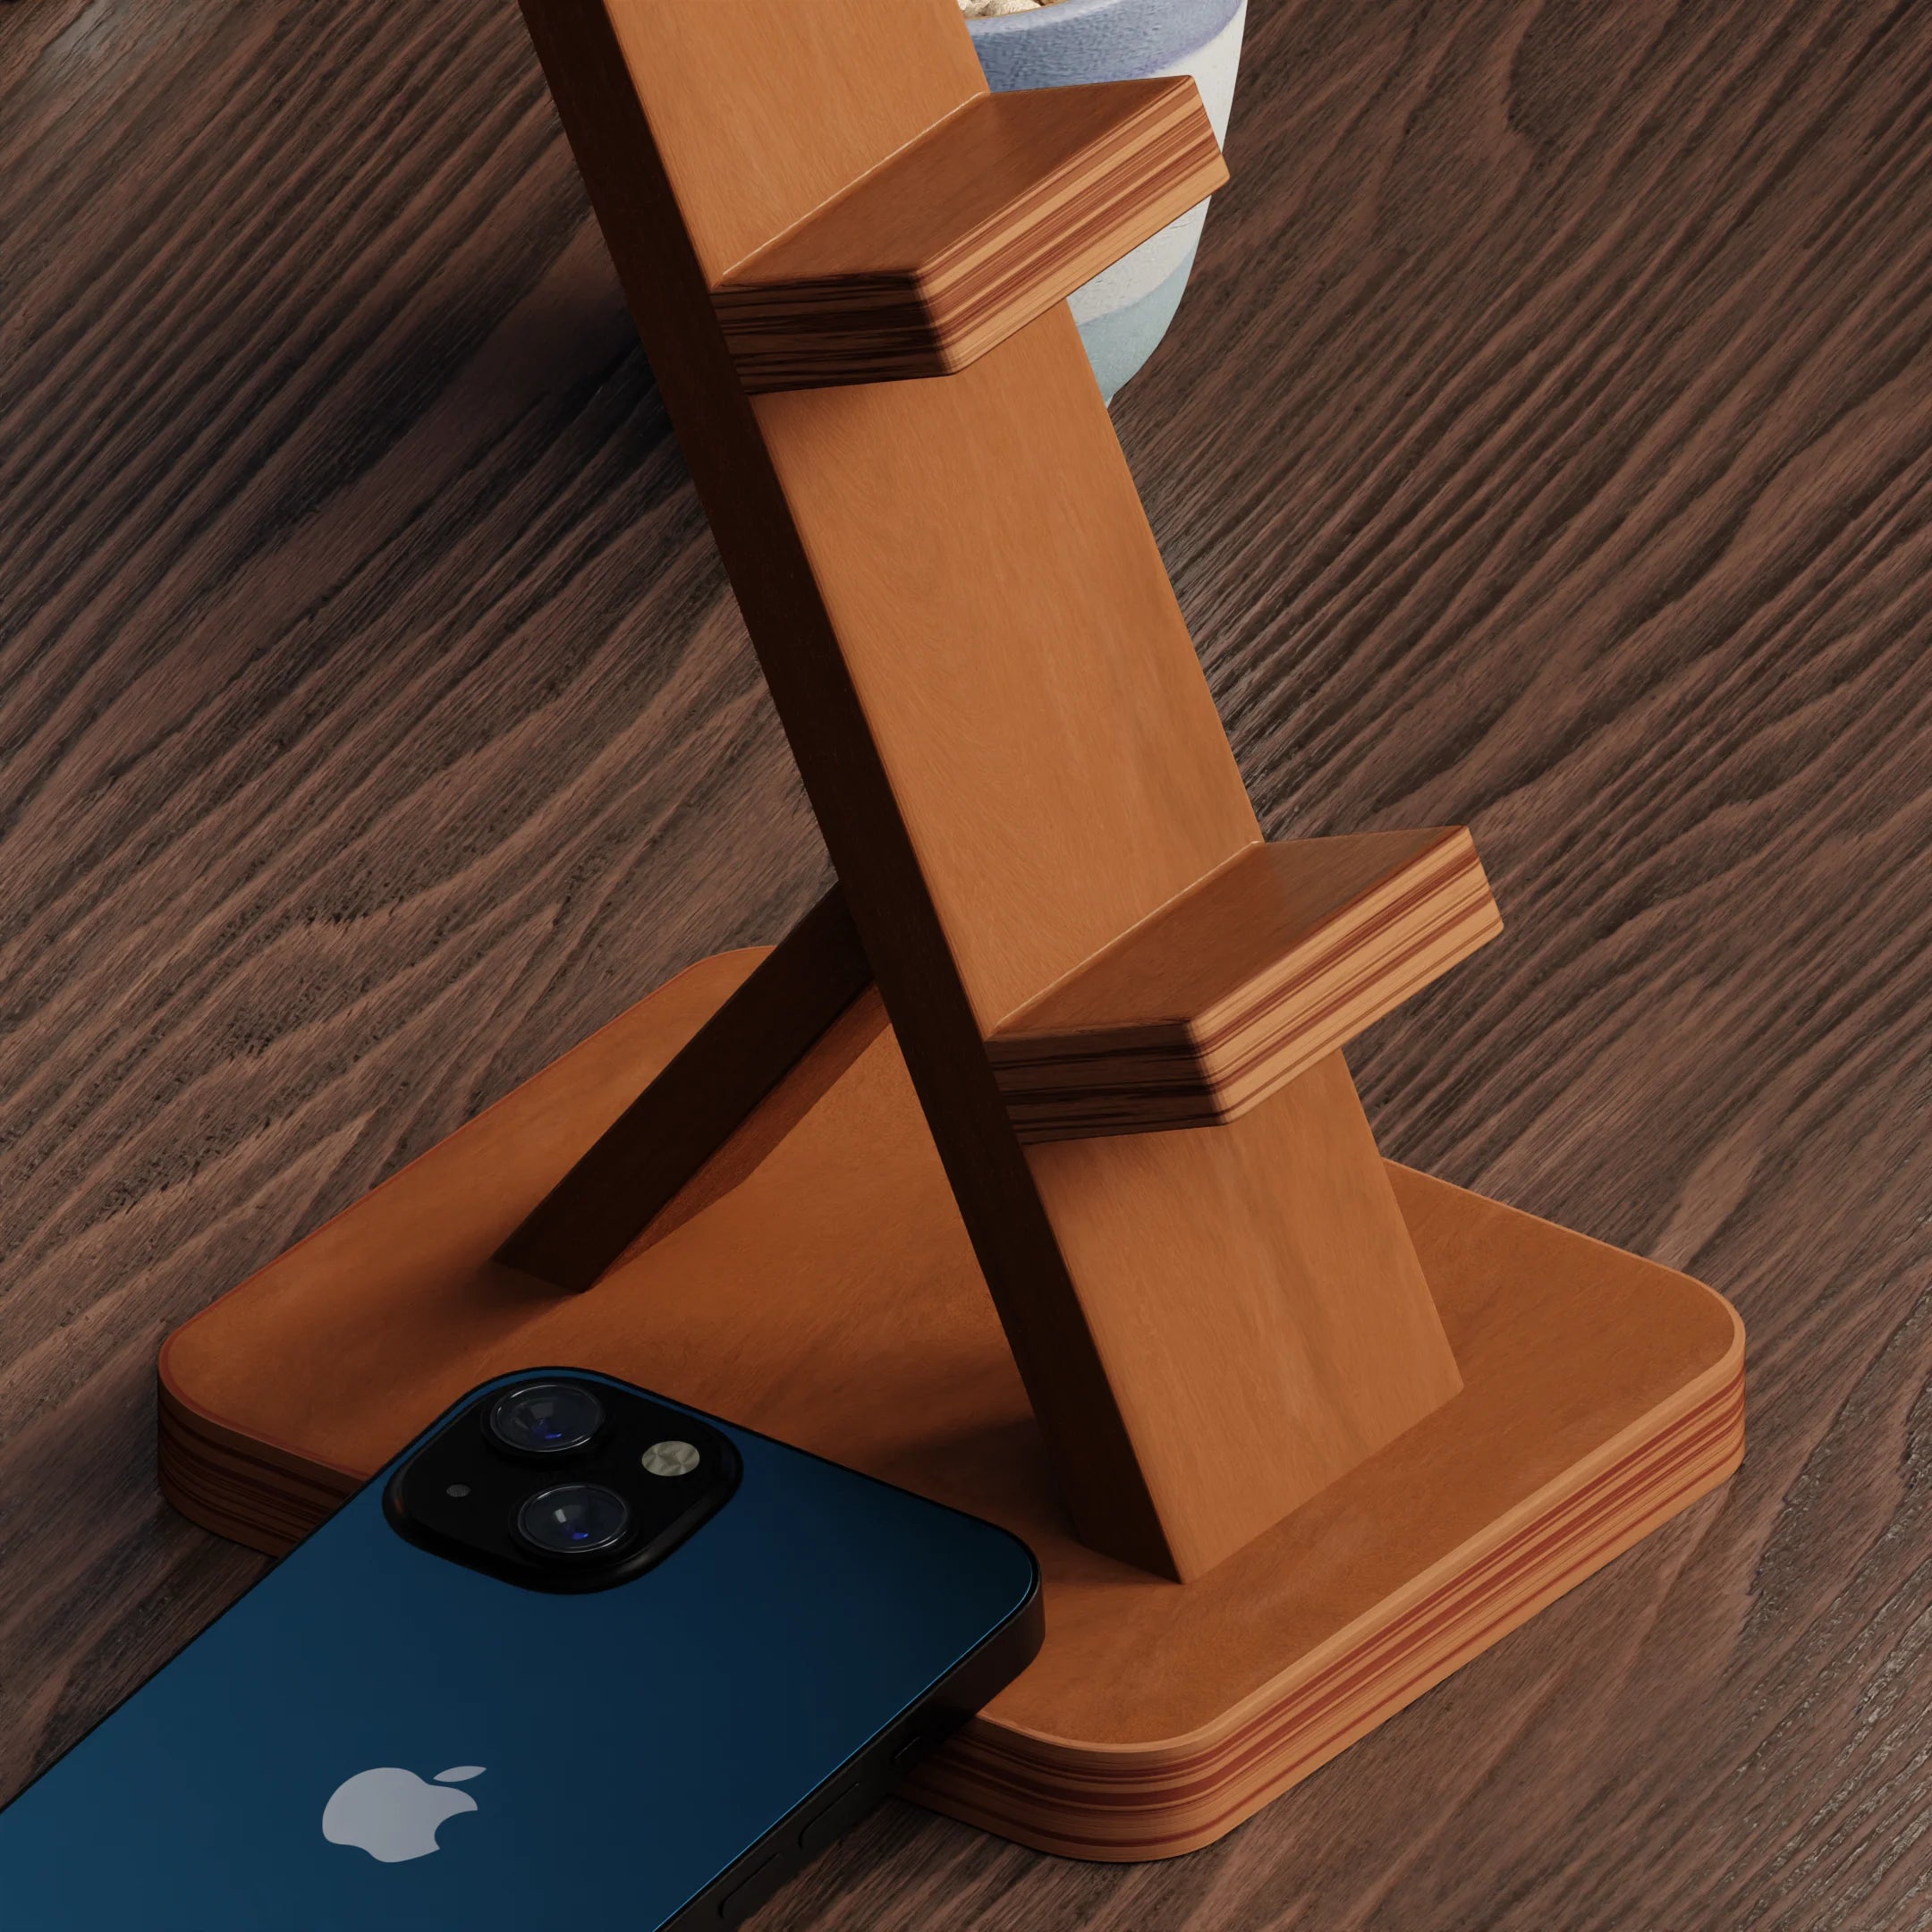 Wooden controller and headphone stand minimalist design.